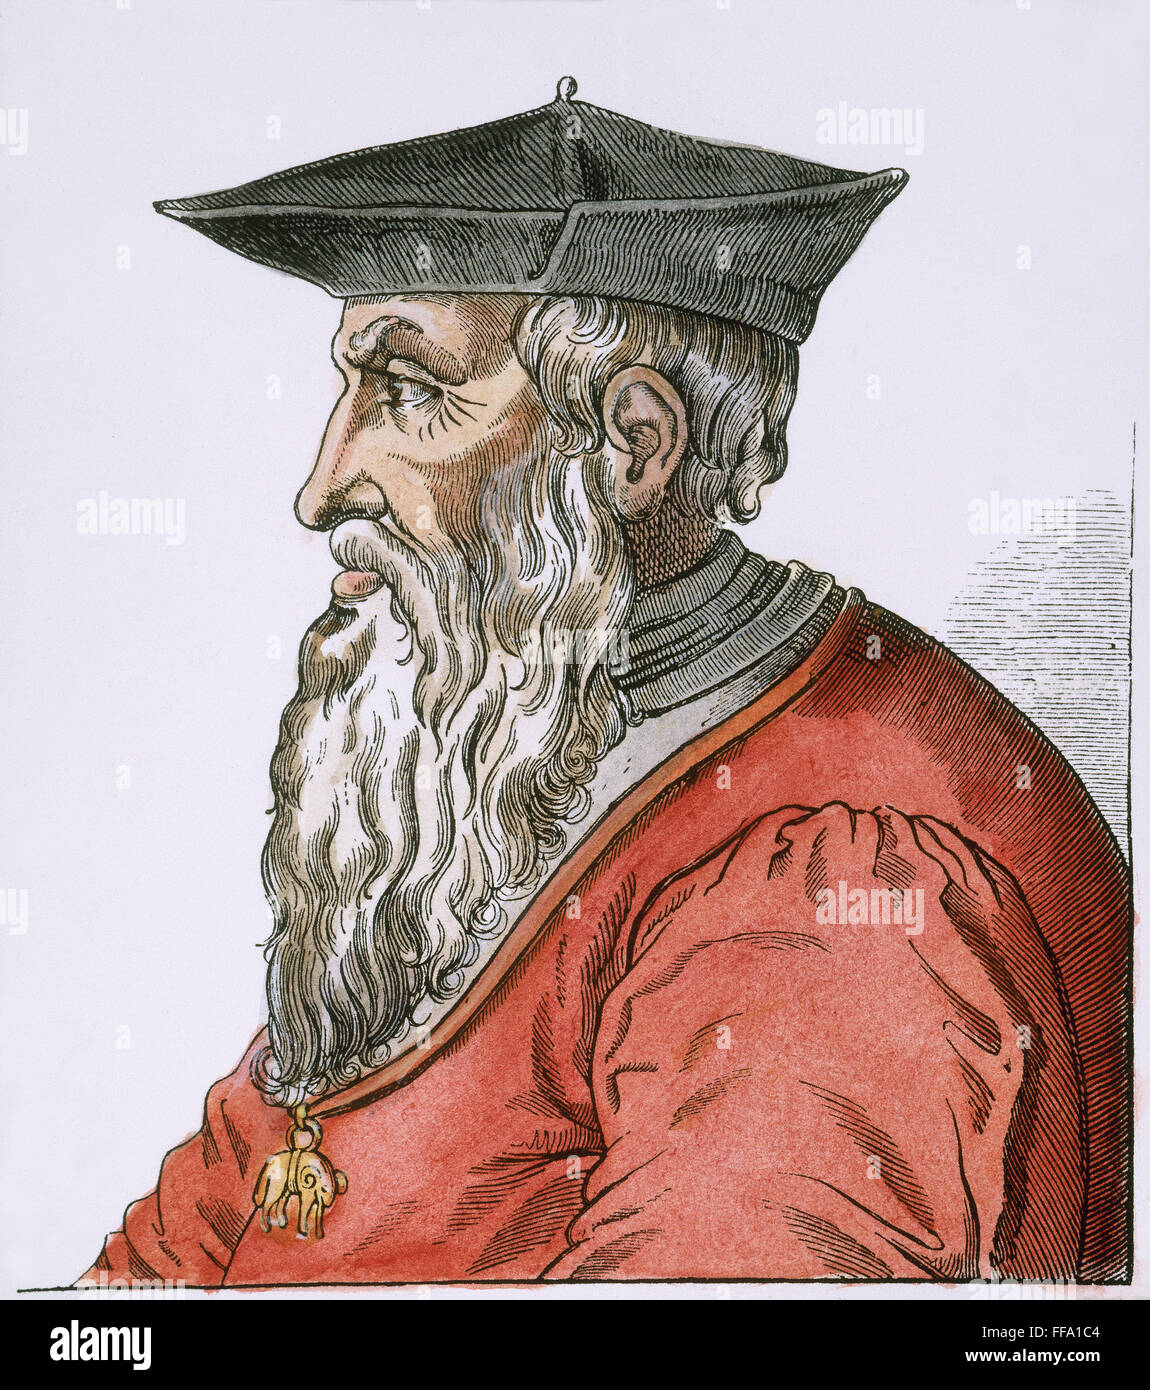 ANDREA DORIA (1466-1560). /nGenoese admiral and statesman. Line engraving after a contemporary portrait. Stock Photo